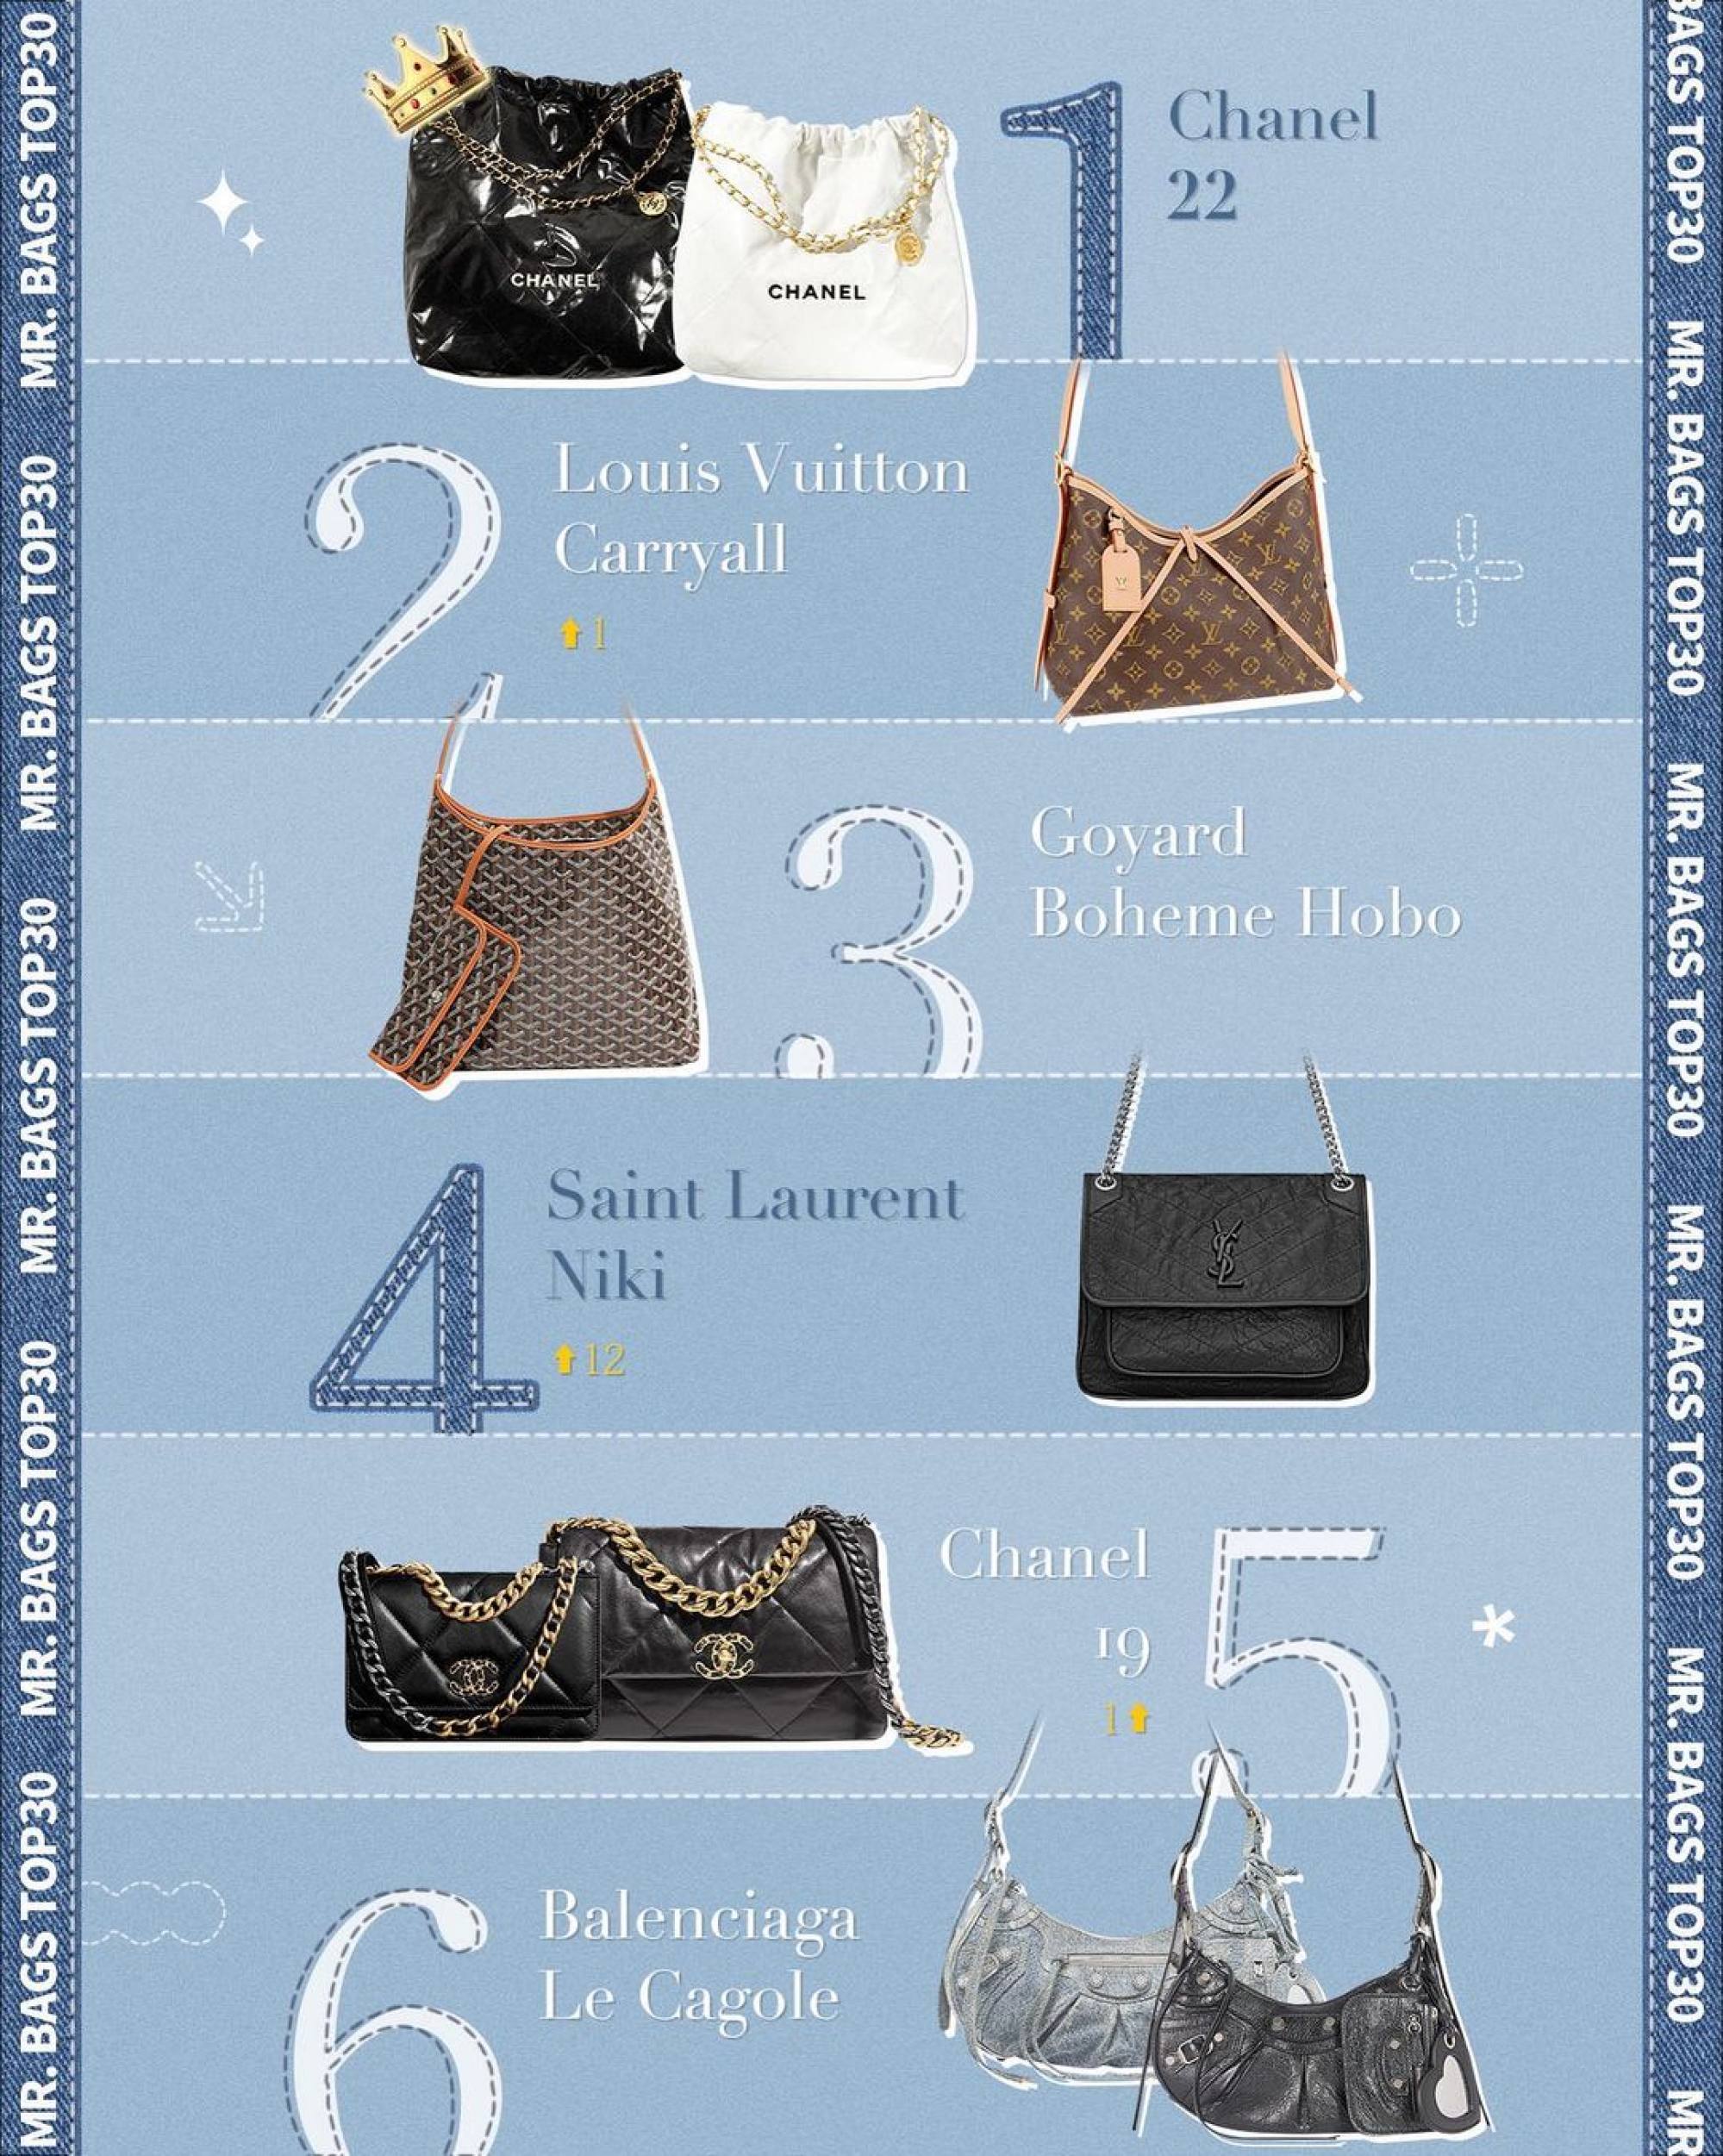 The 10 Most Popular Louis Vuitton Bags, Ranked